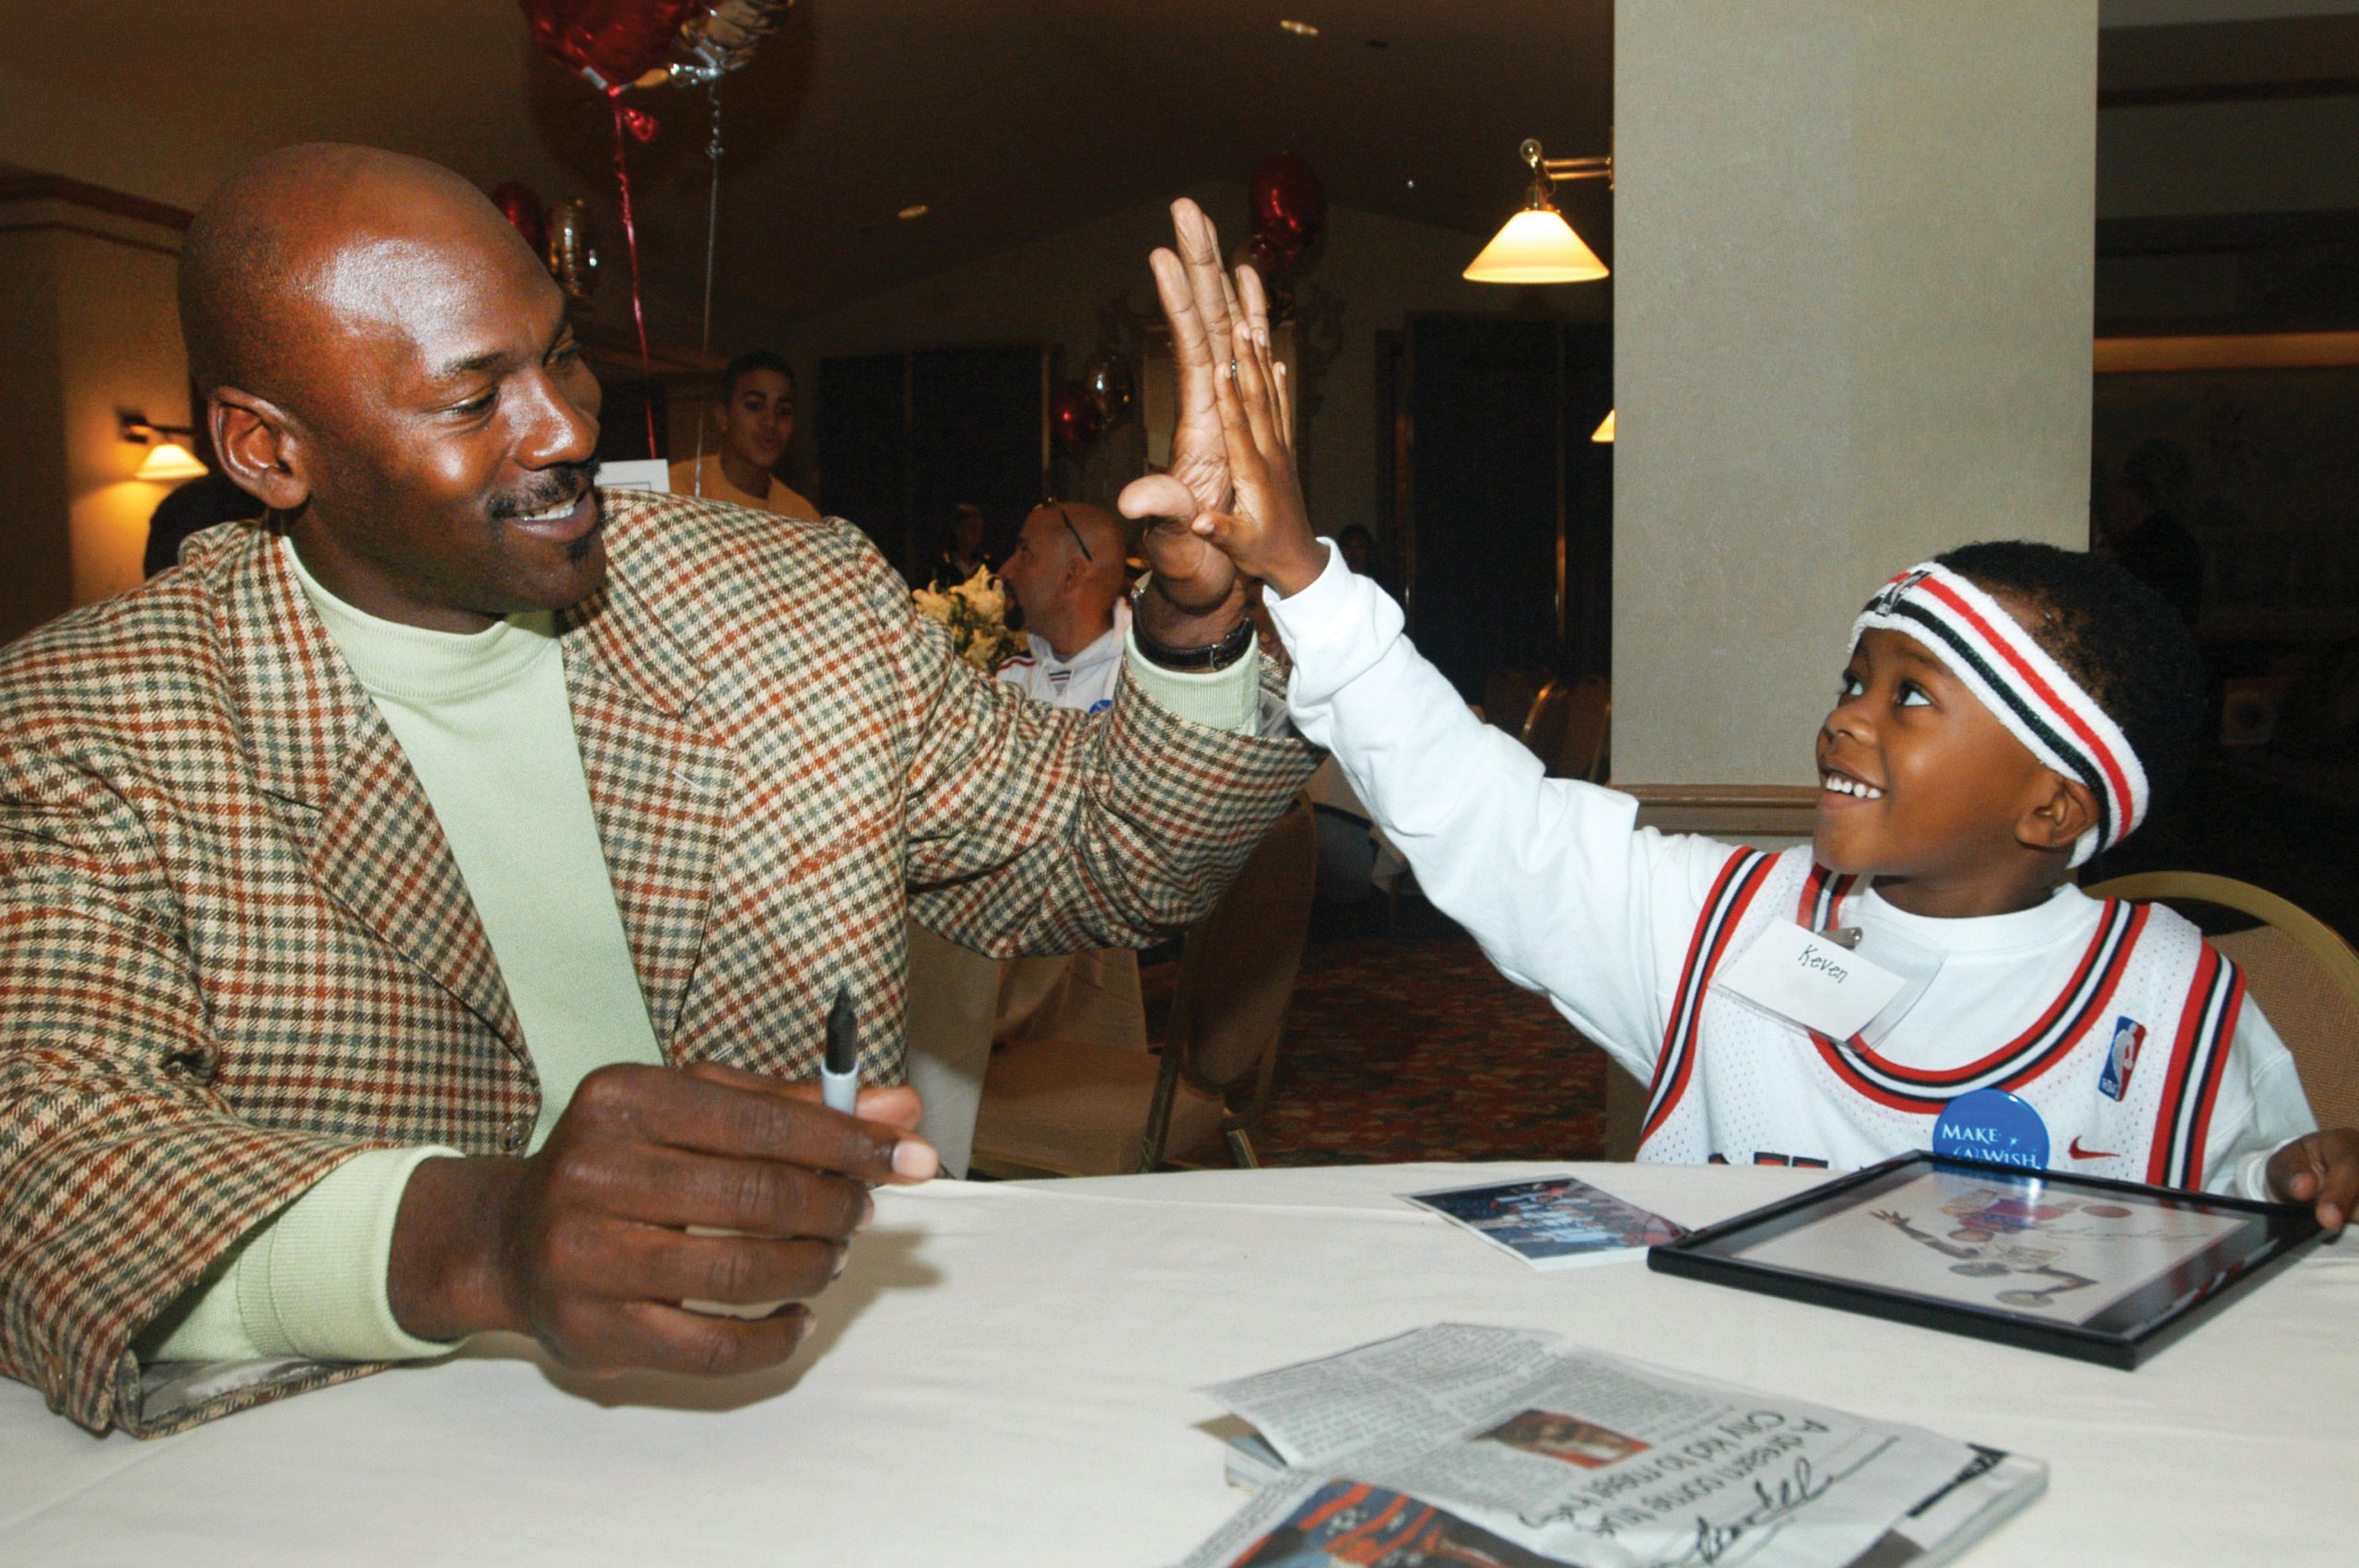 Michael Jordan Celebrates His Birthday With a $10 Million Gift to  Make-a-Wish Foundation